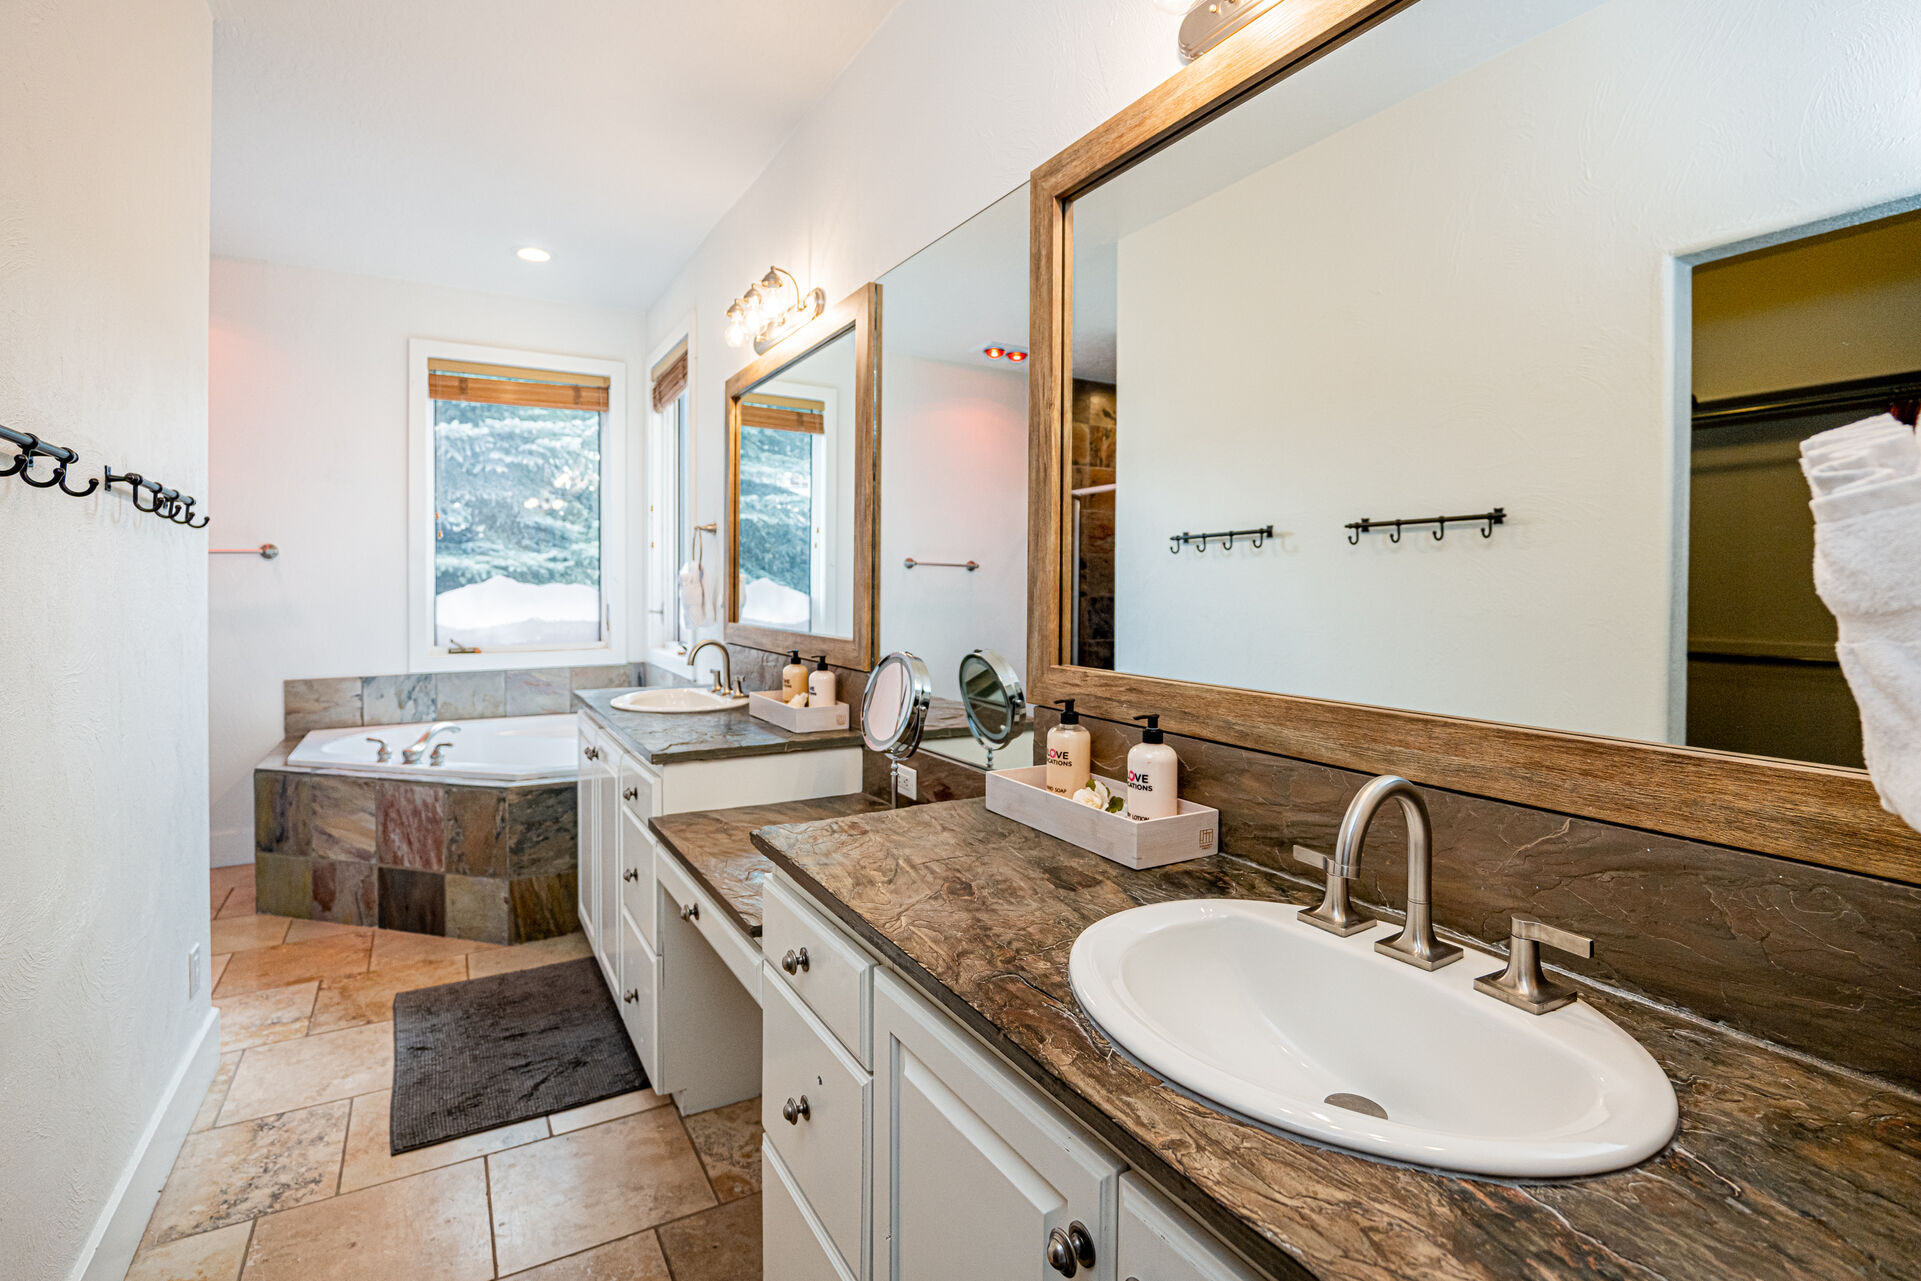 Grand Master Bathroom with Two Vanities, a Jetted Tub and Shower